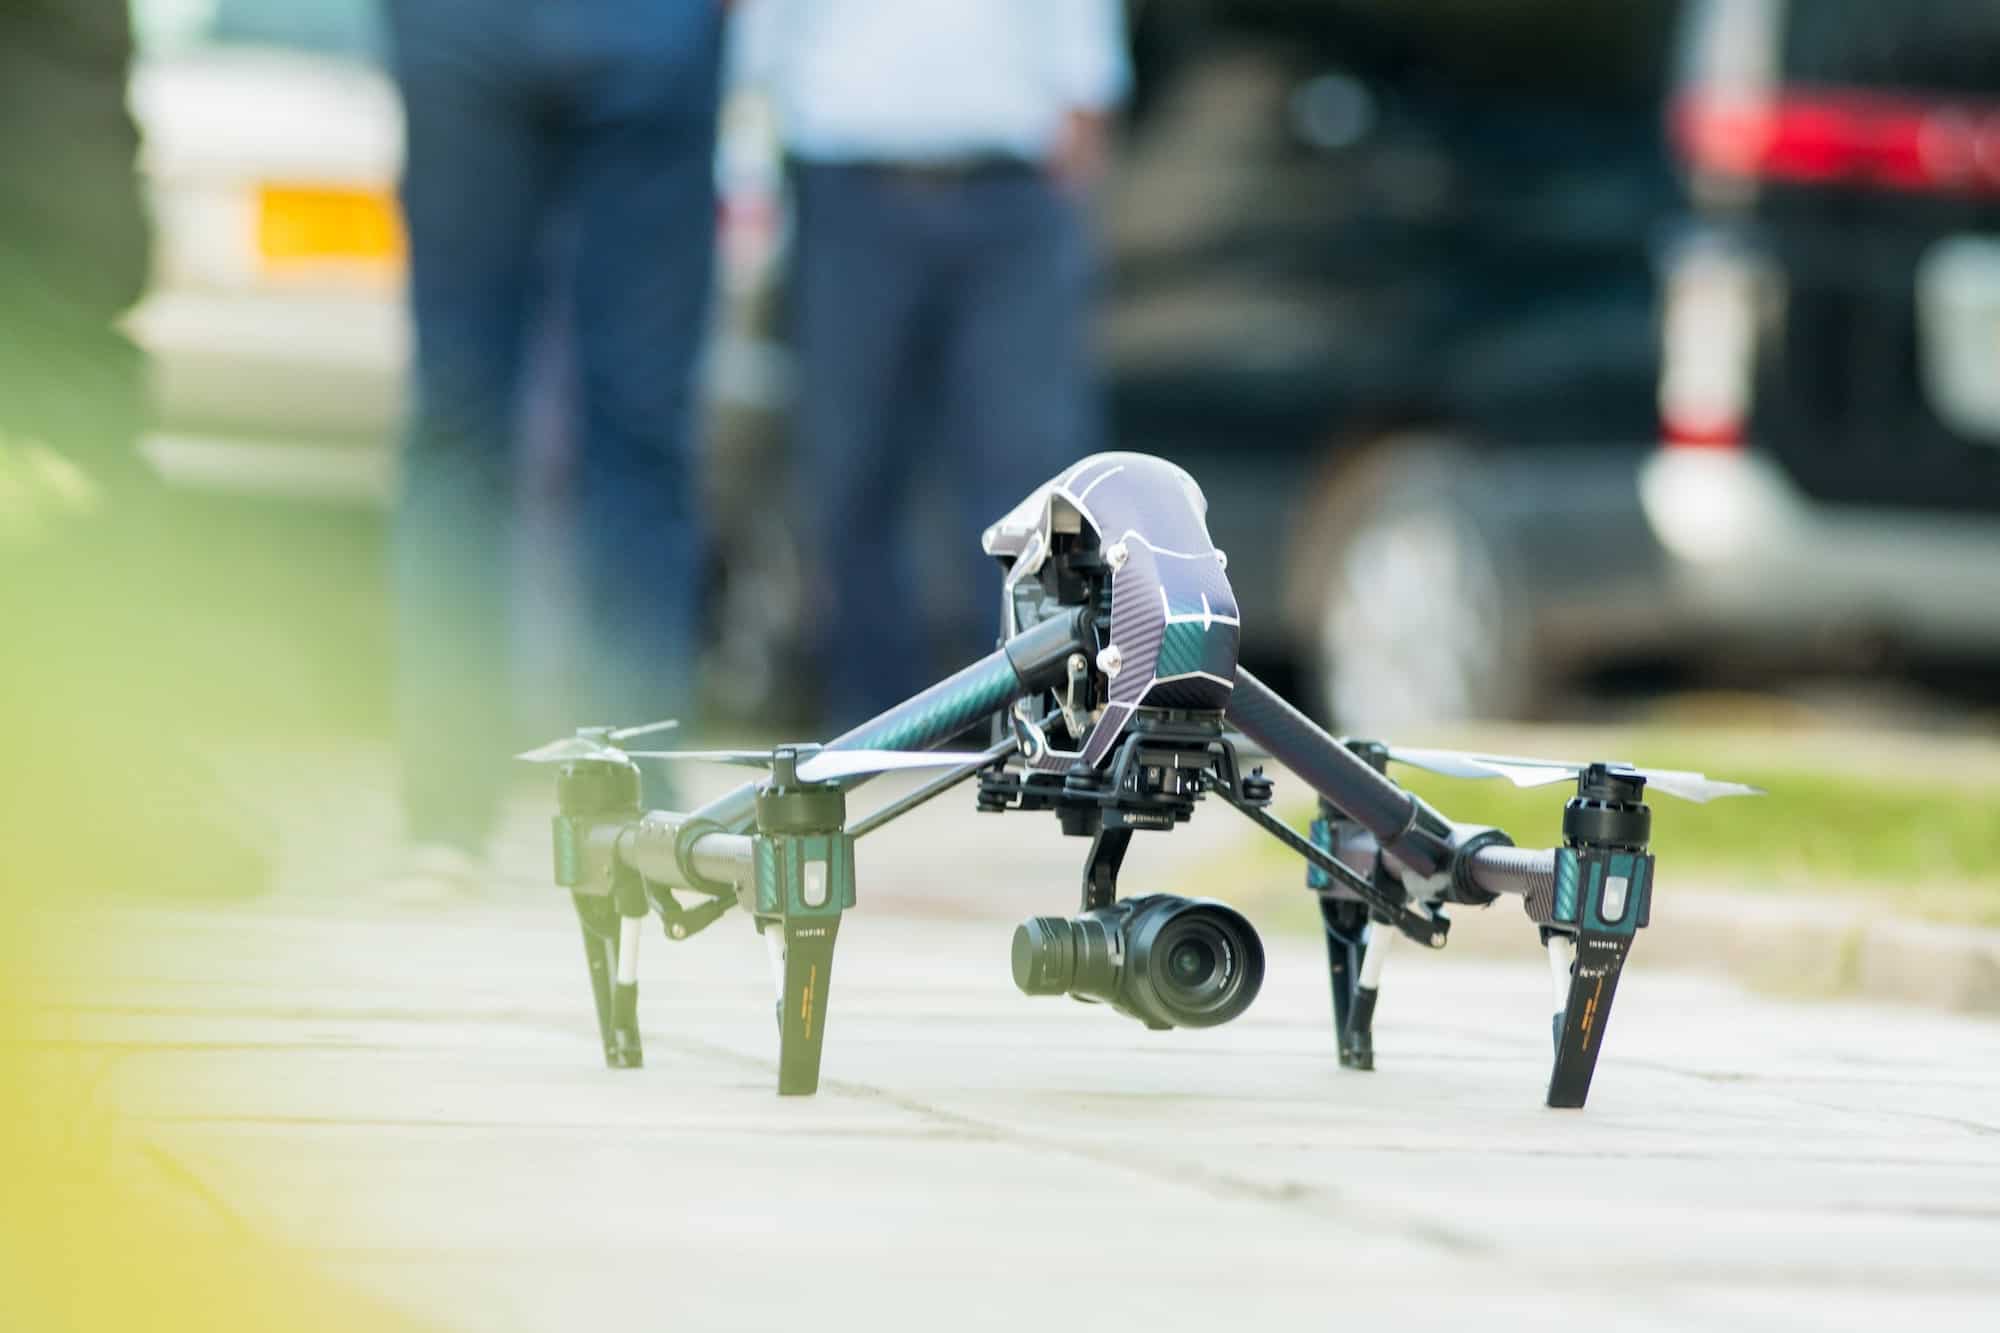 Drone Technology to Save Lives and Aid First Responders